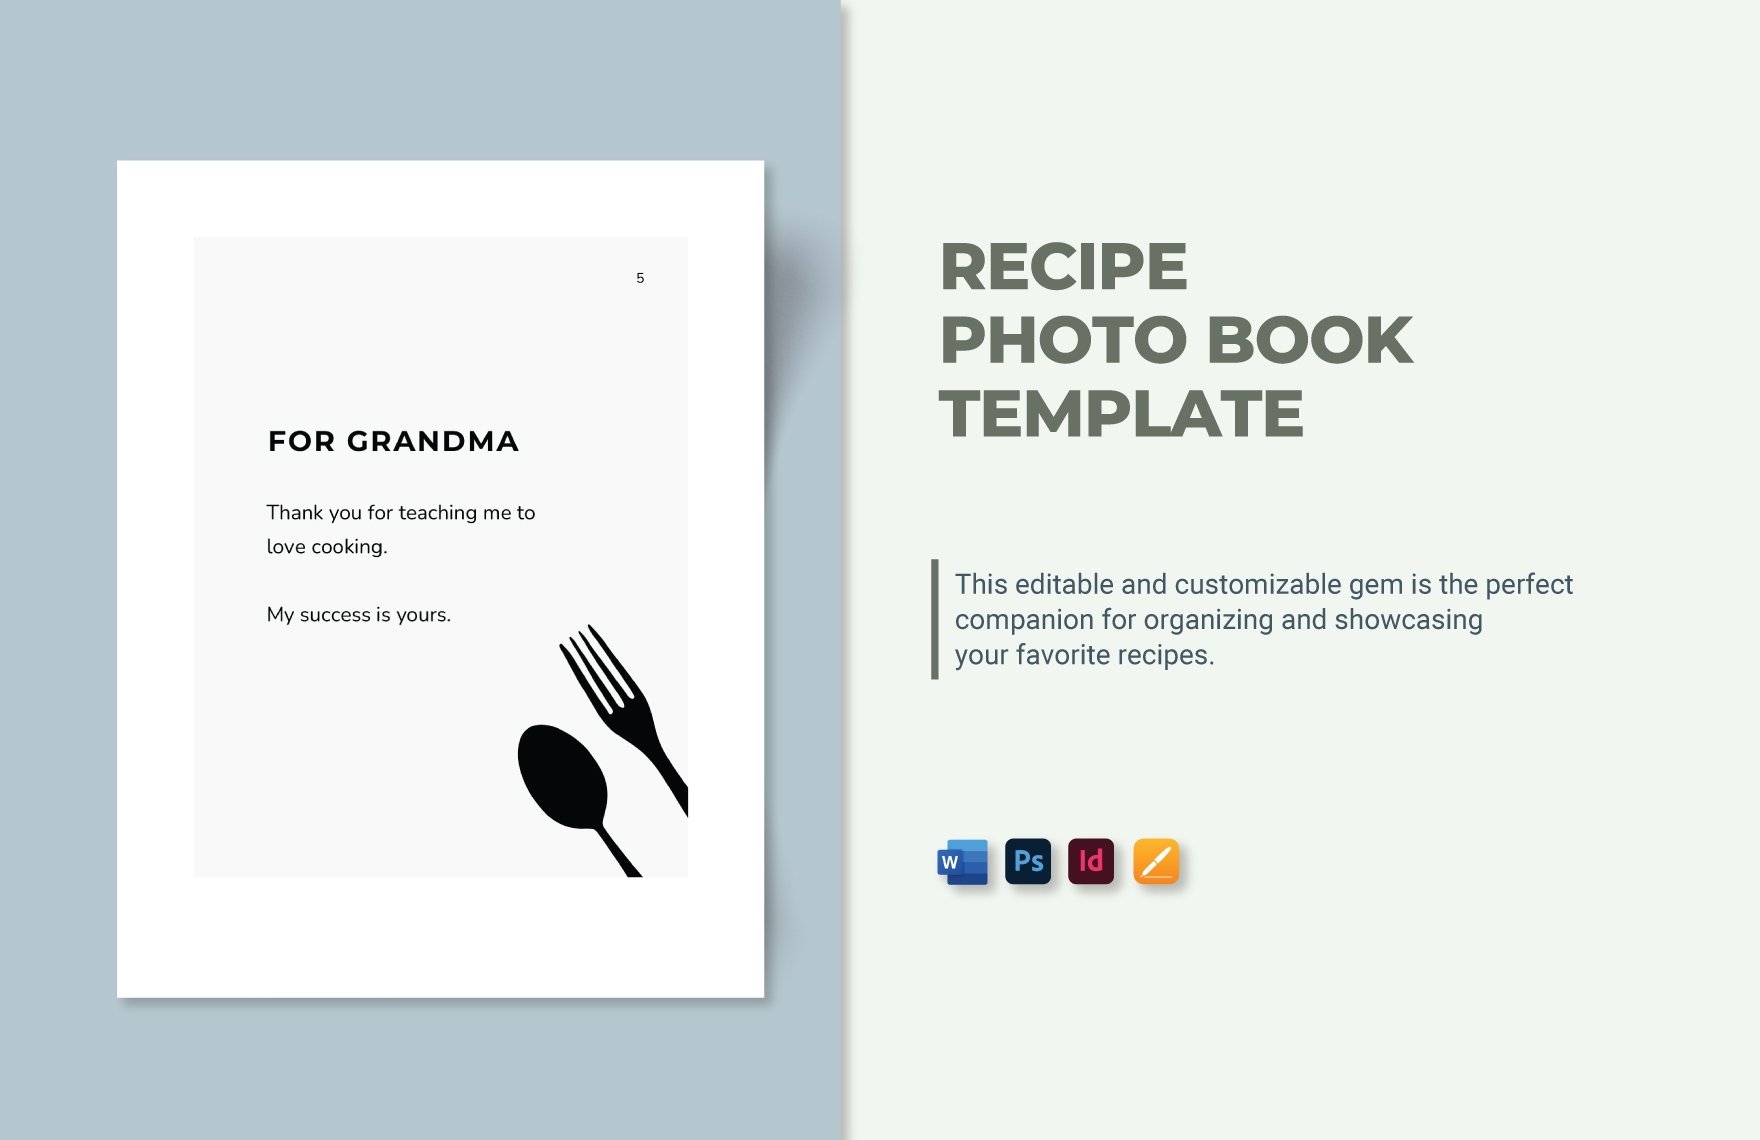 Free Recipe Photo Book Template in Word, PSD, Apple Pages, InDesign